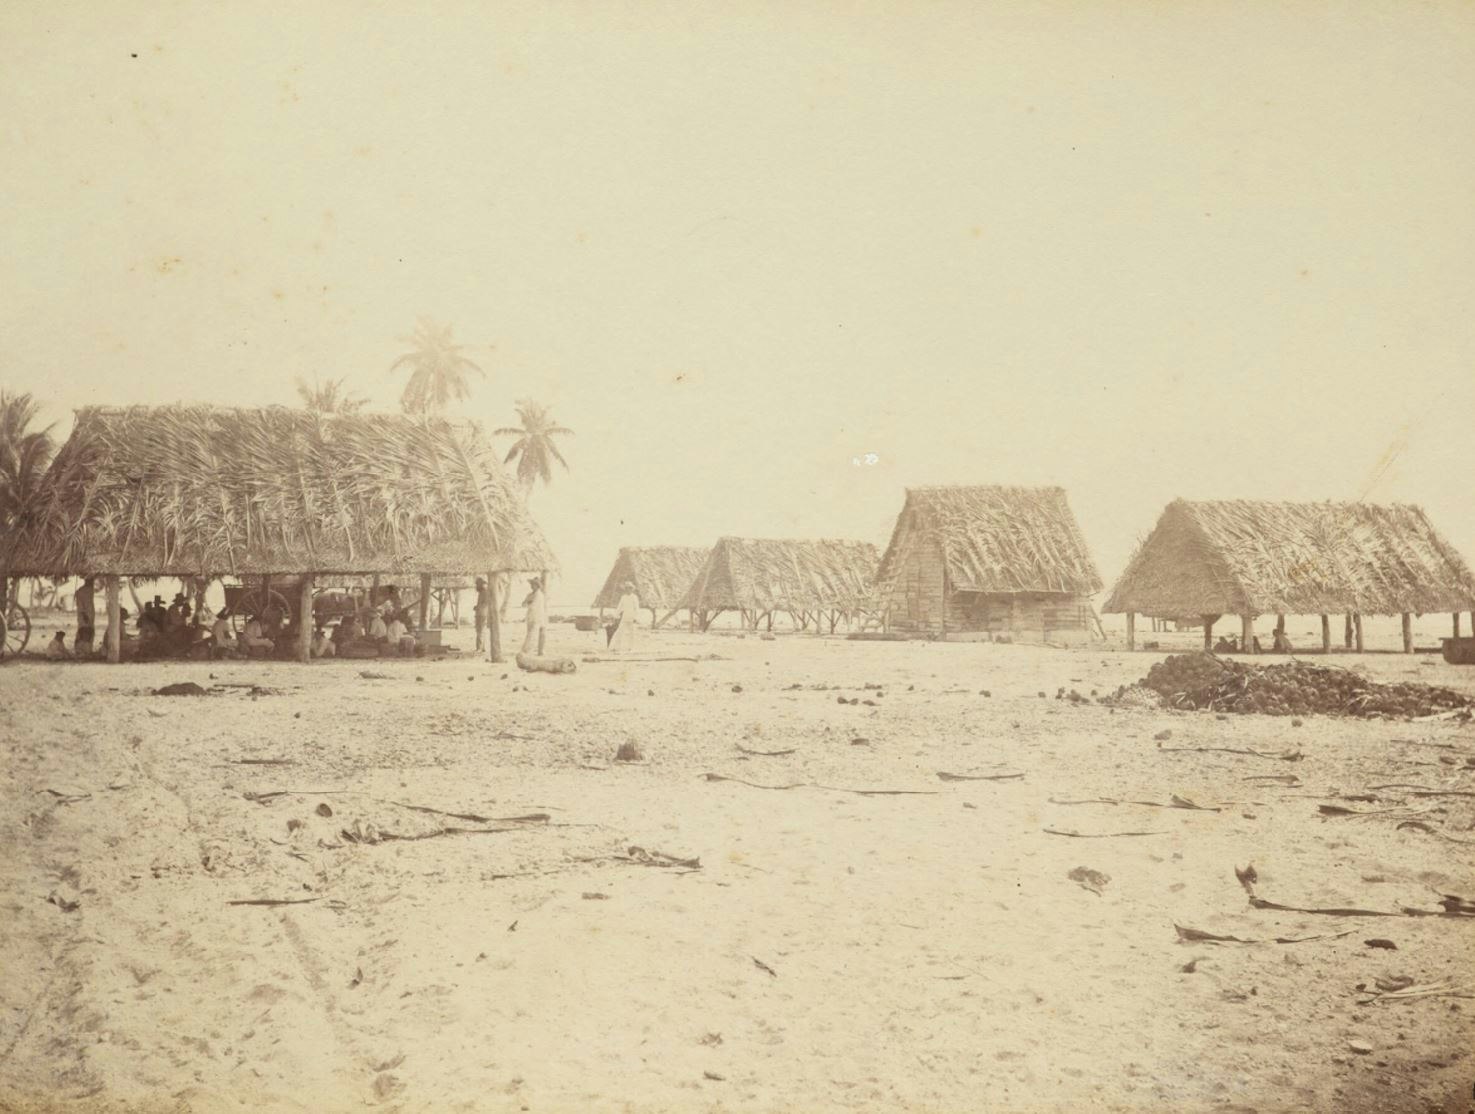 Sepia photograph of huts with people sat under them